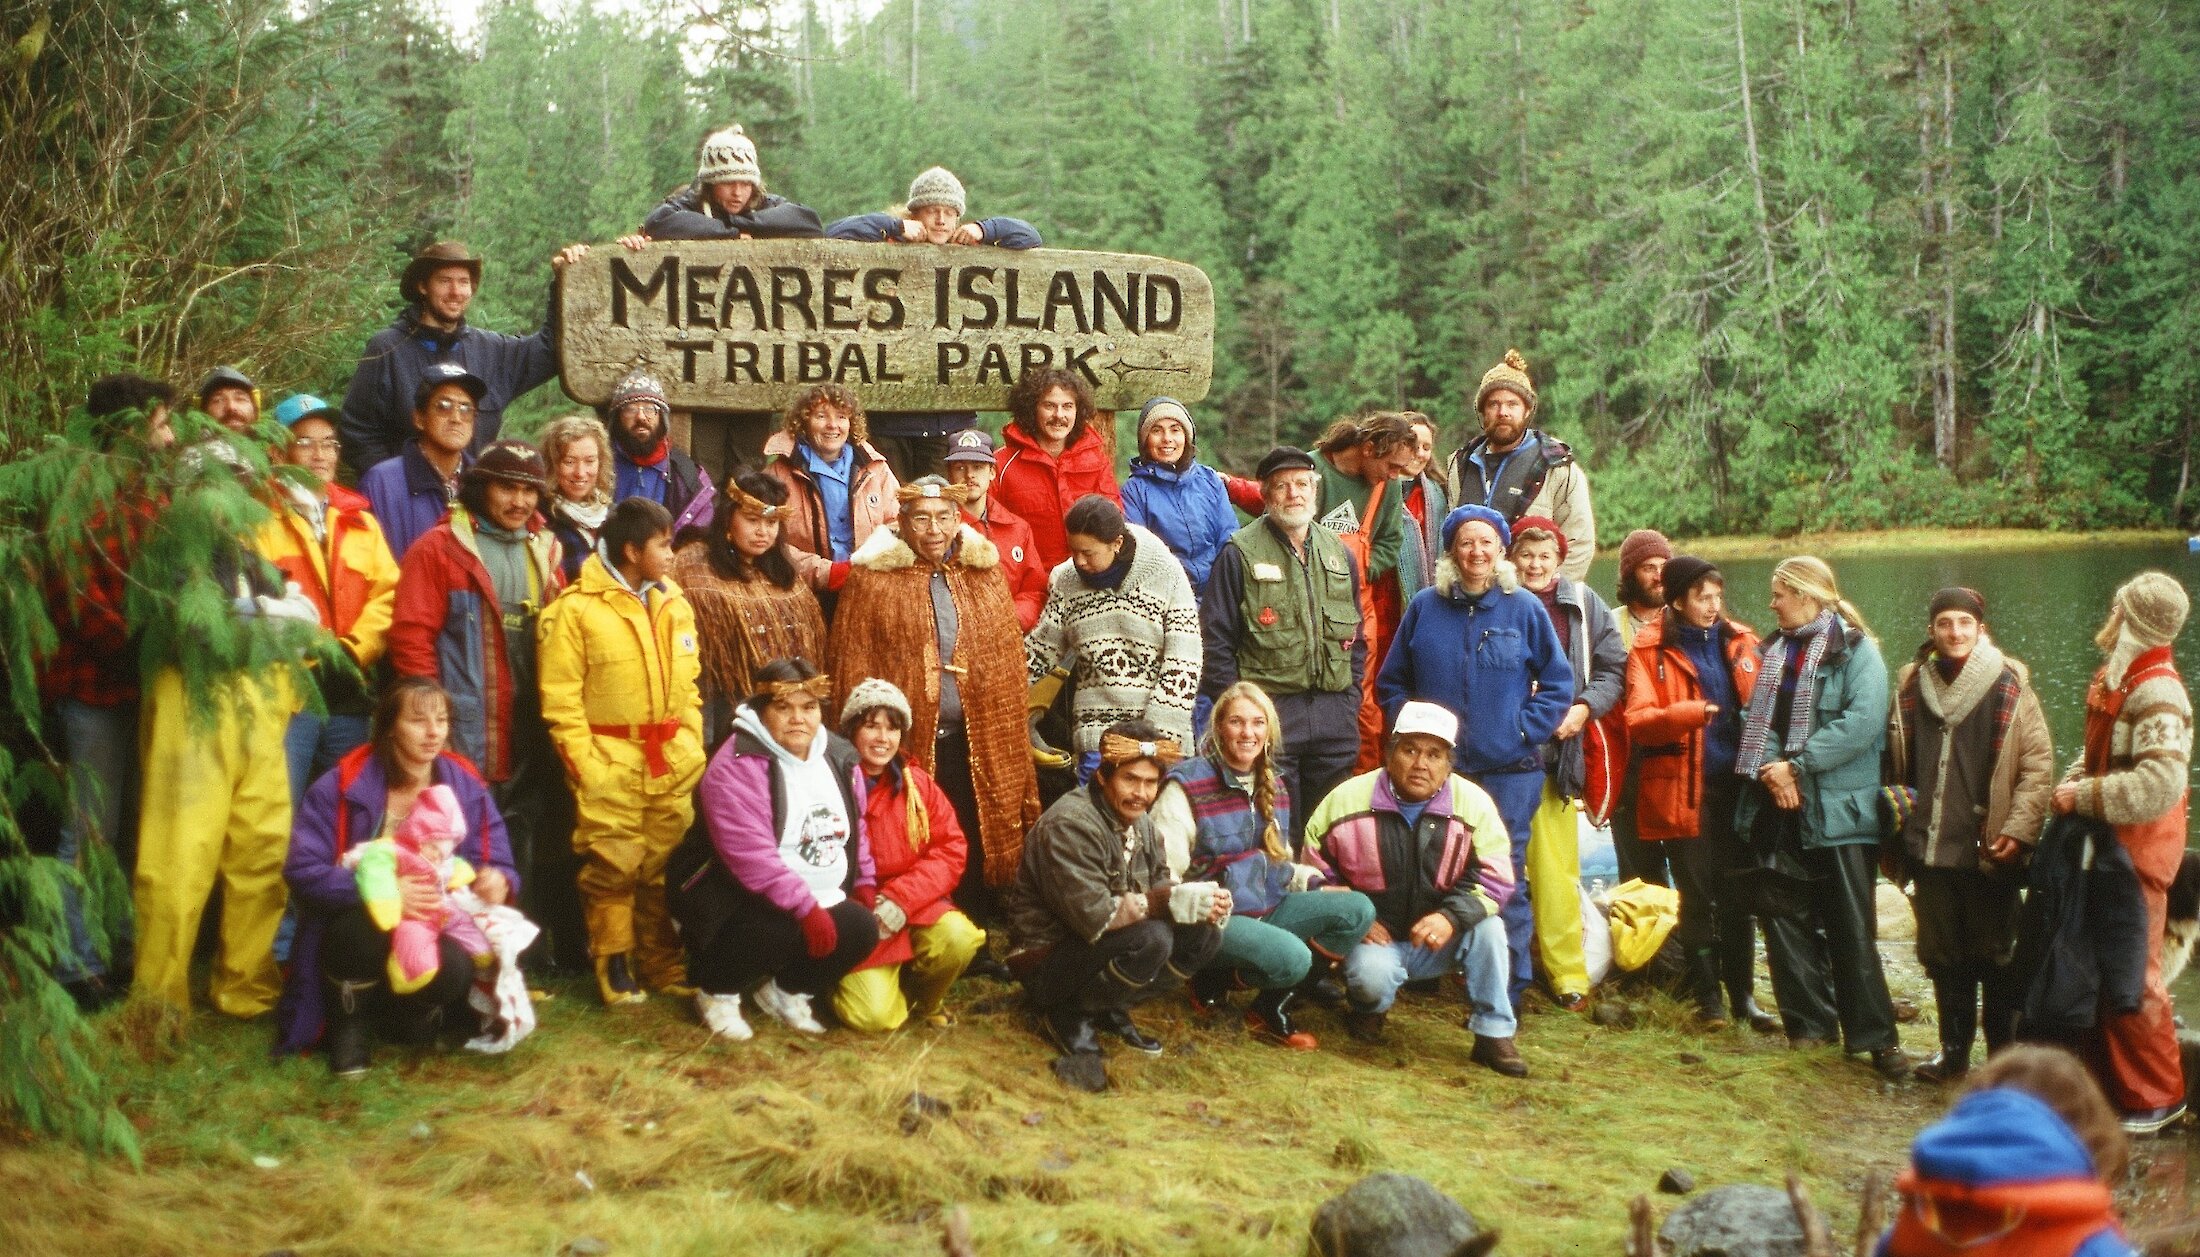 Group of activists standing together against a Meares Island Tribal Park sign